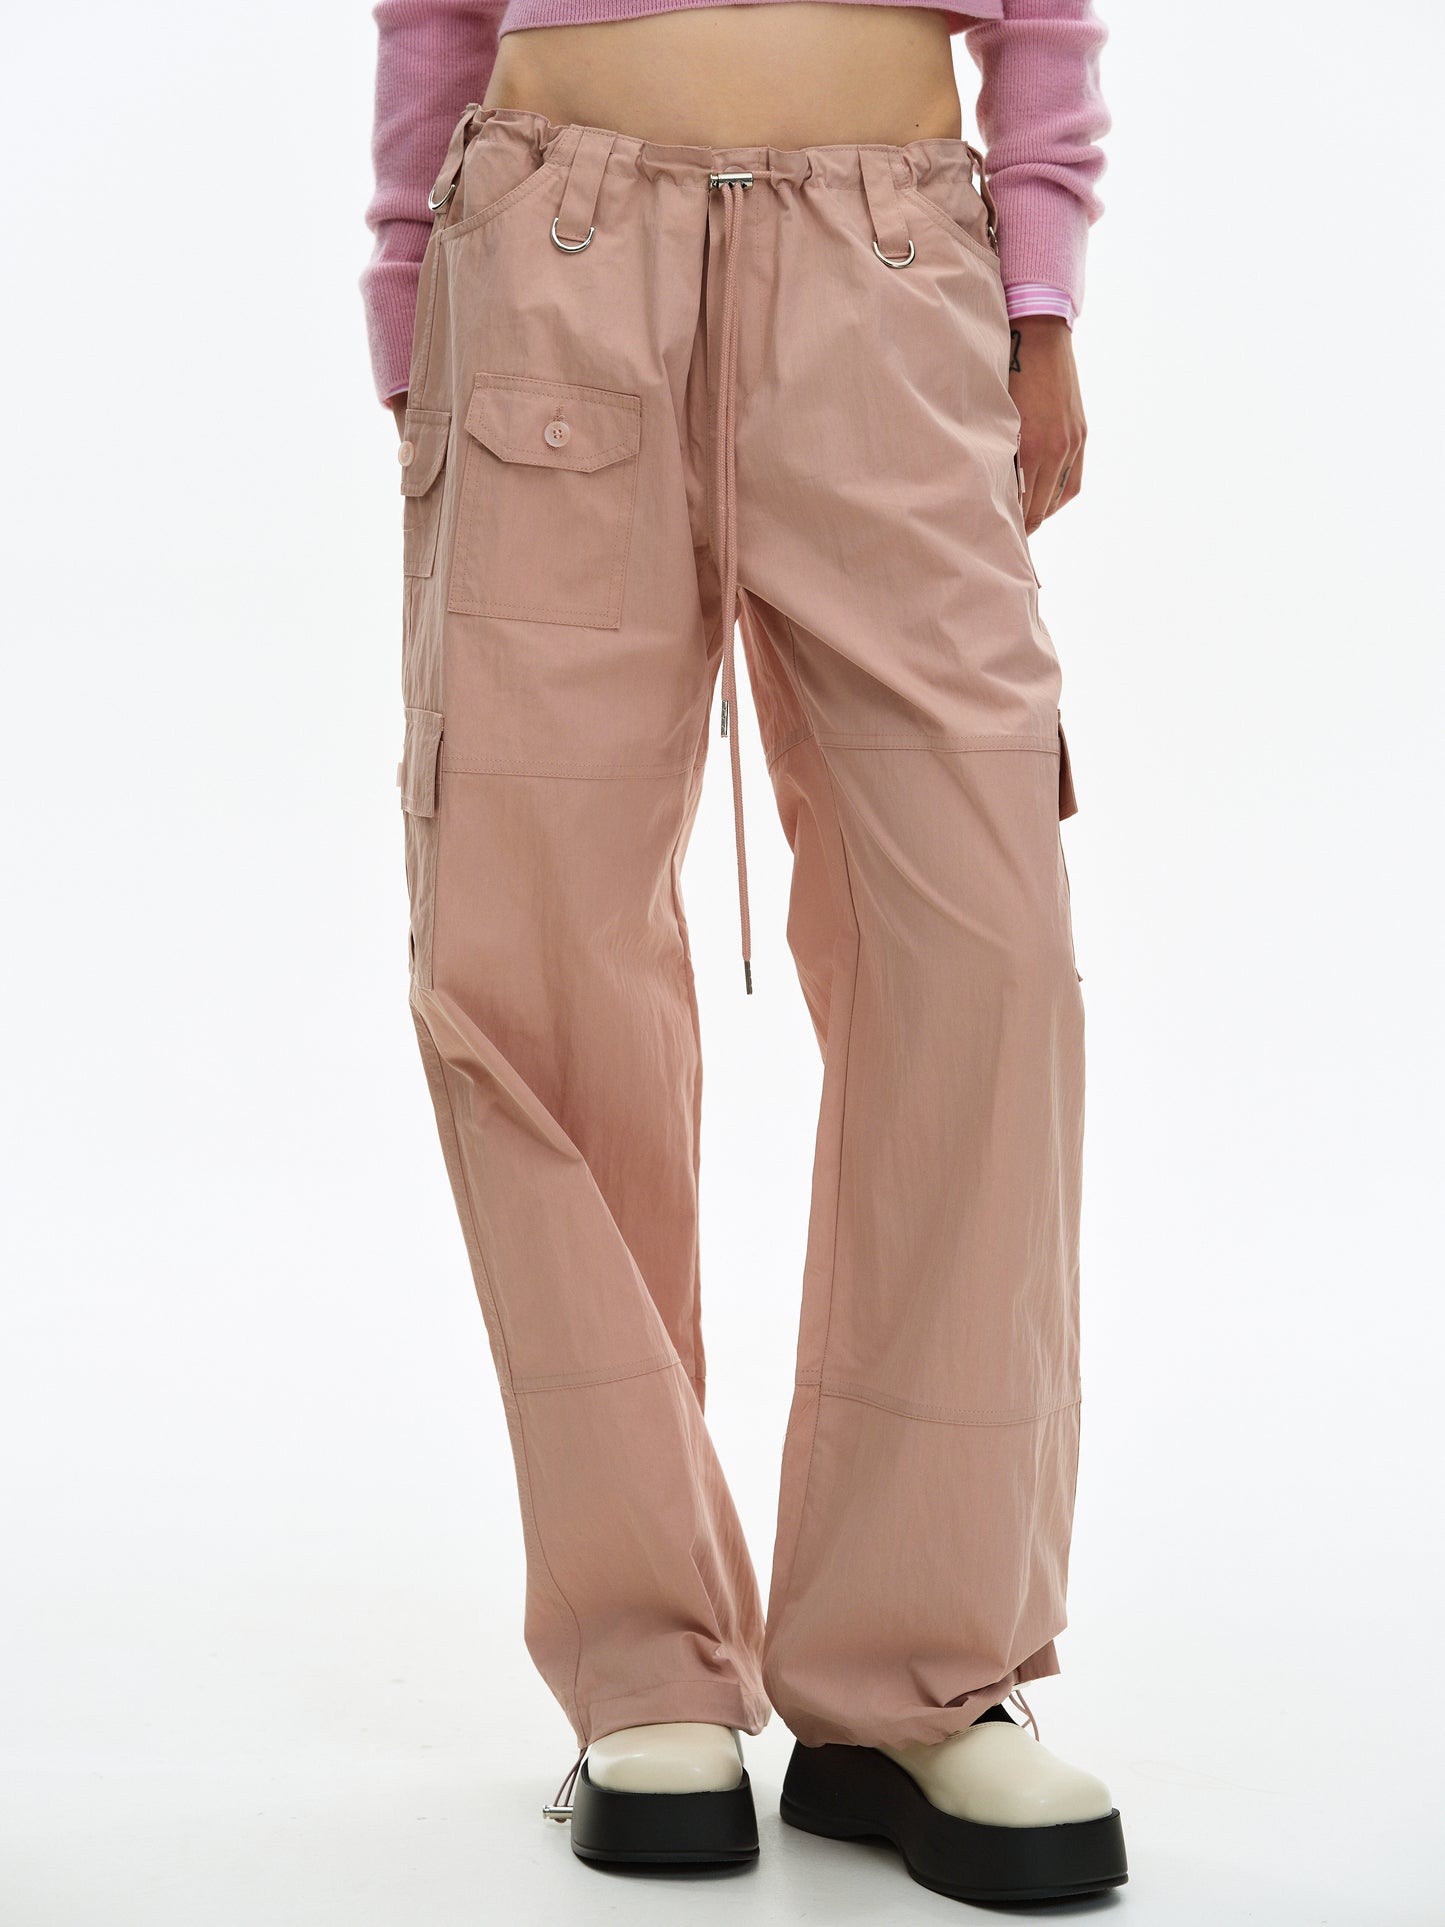 Cargo – SourceUnknown Trousers, Dusty Pink Parachute